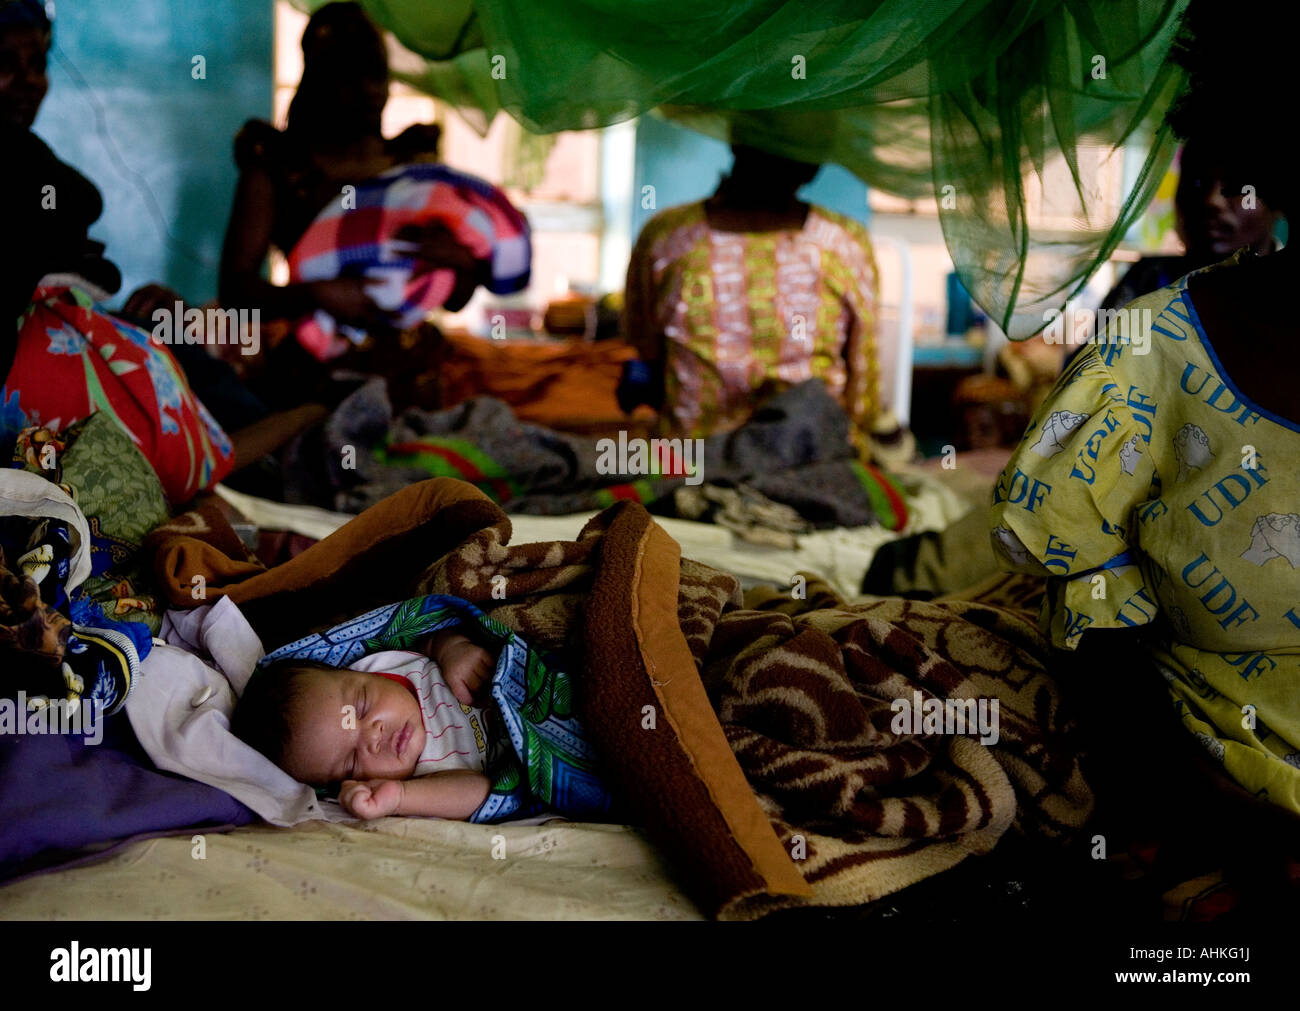 A baby has just been born at Bottom maternity Hospital, in Lilongwe, Malawi Stock Photo